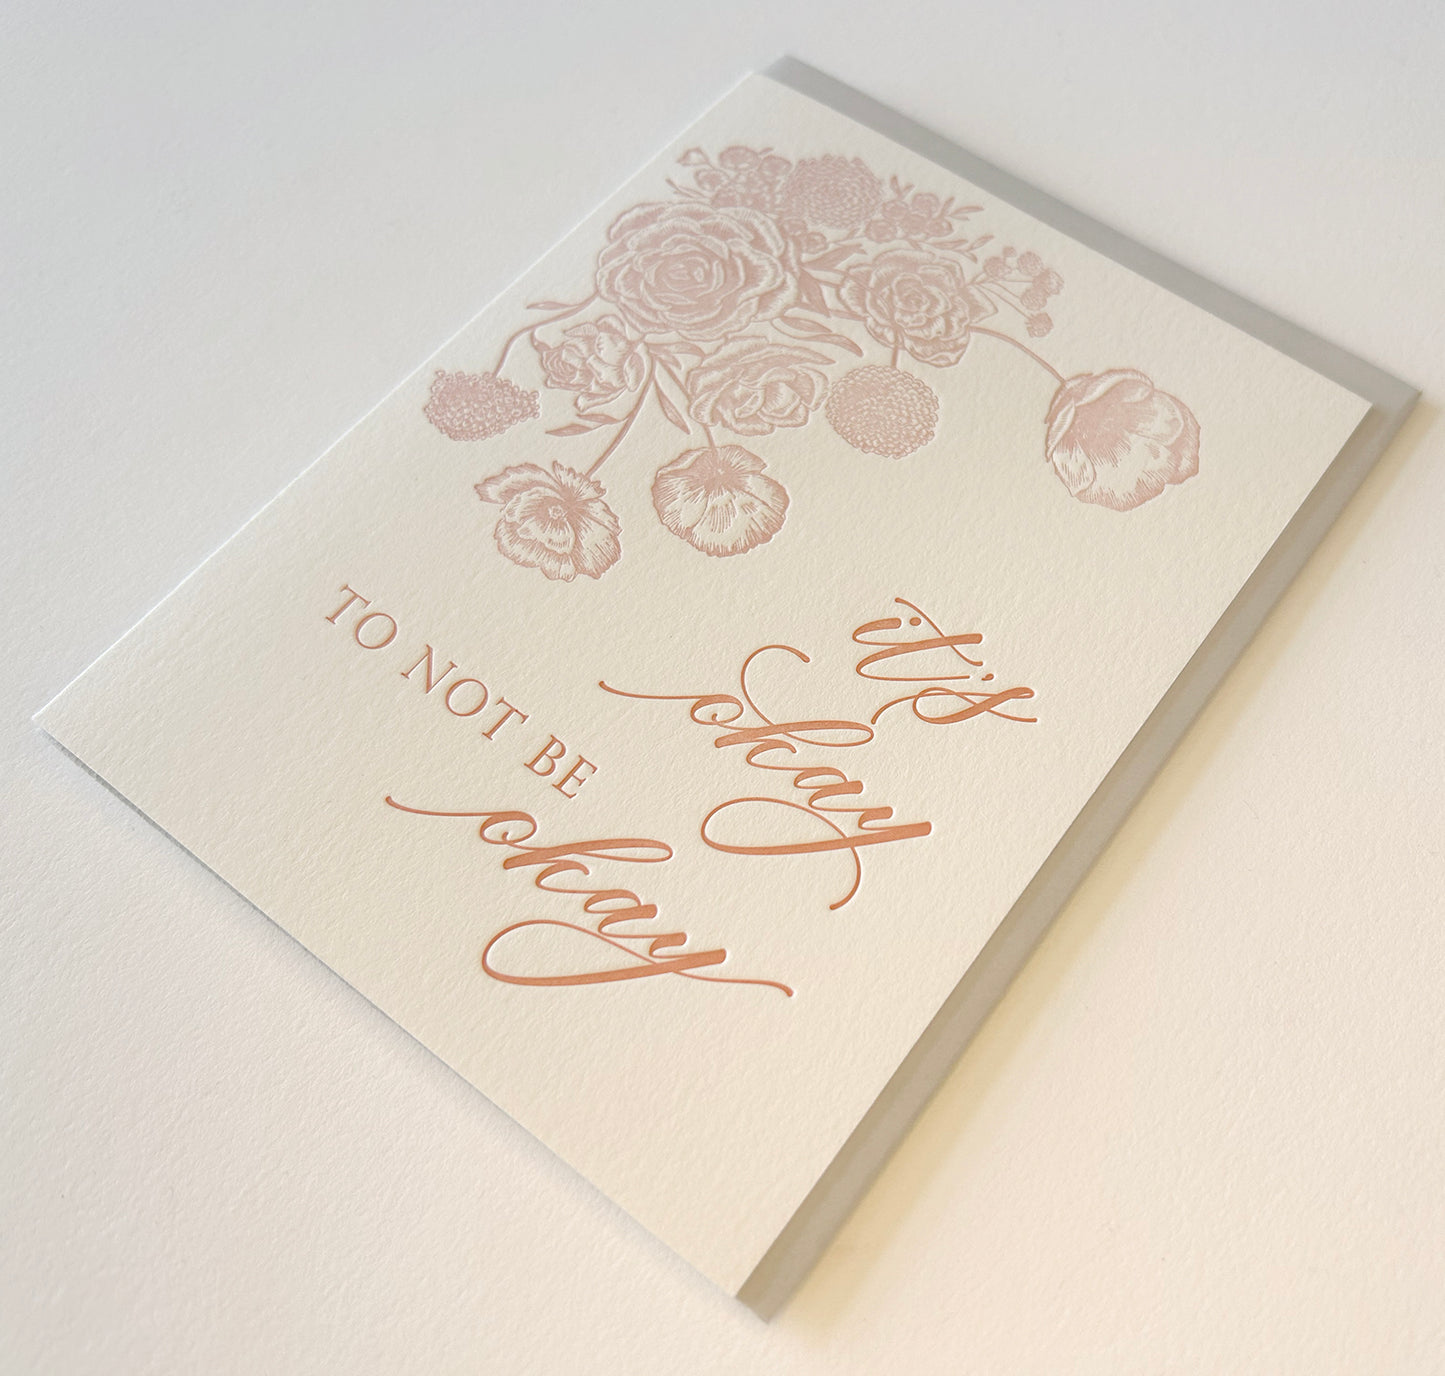 Letterpress encouragement card with florals that says "It's okay to not be okay" by Rust Belt Love